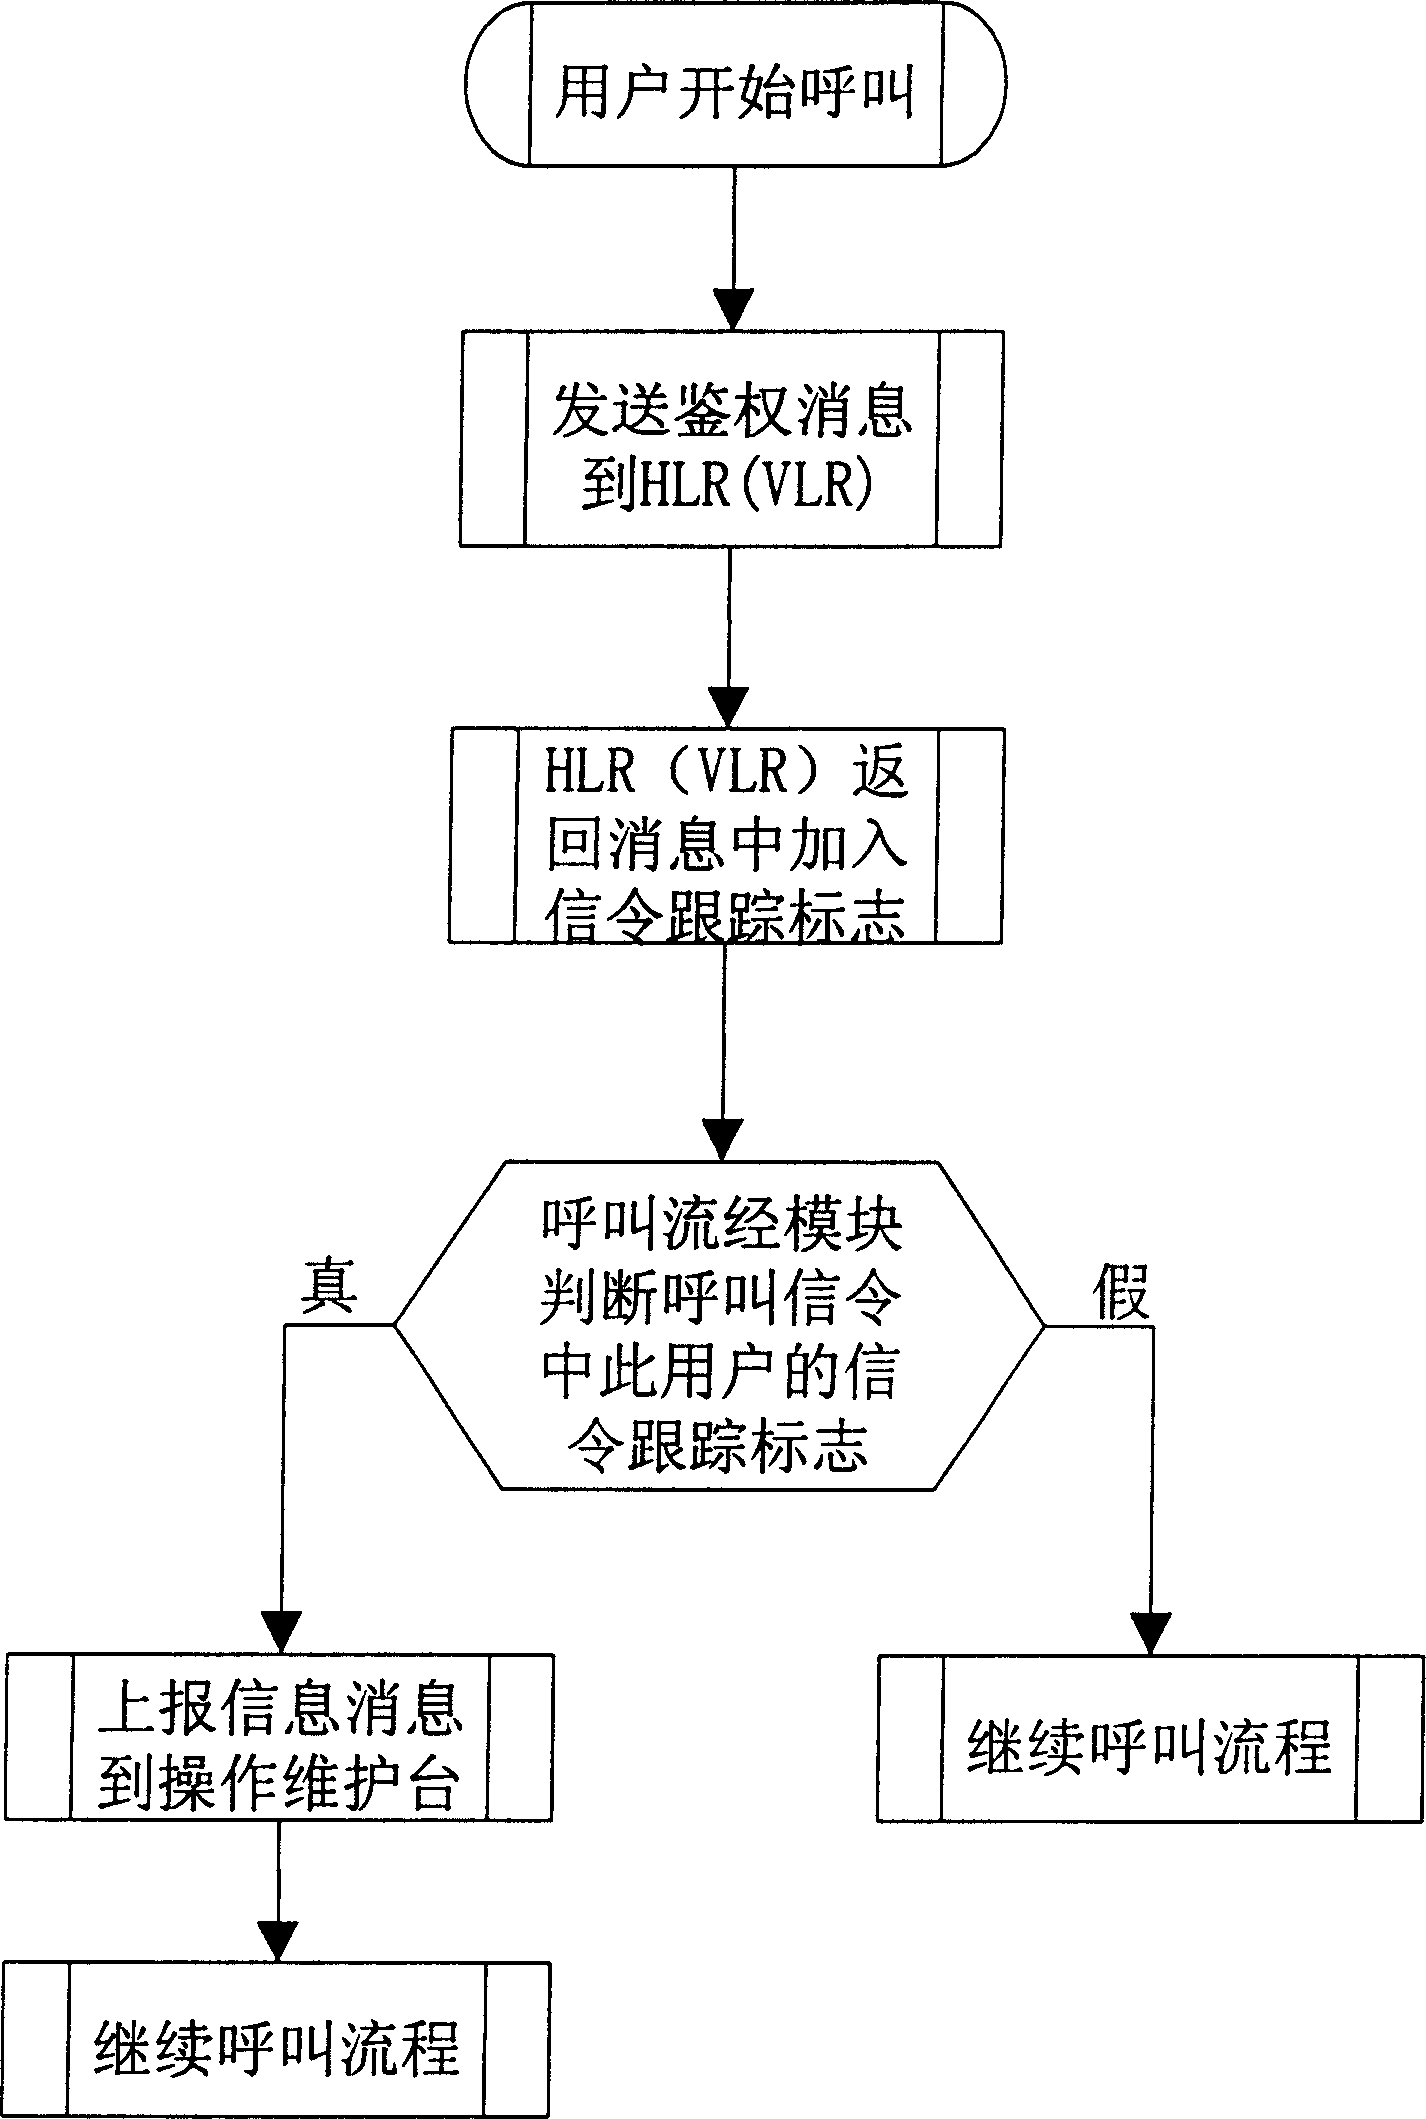 Method of realizing user calling signalling tracking in mobile communication system